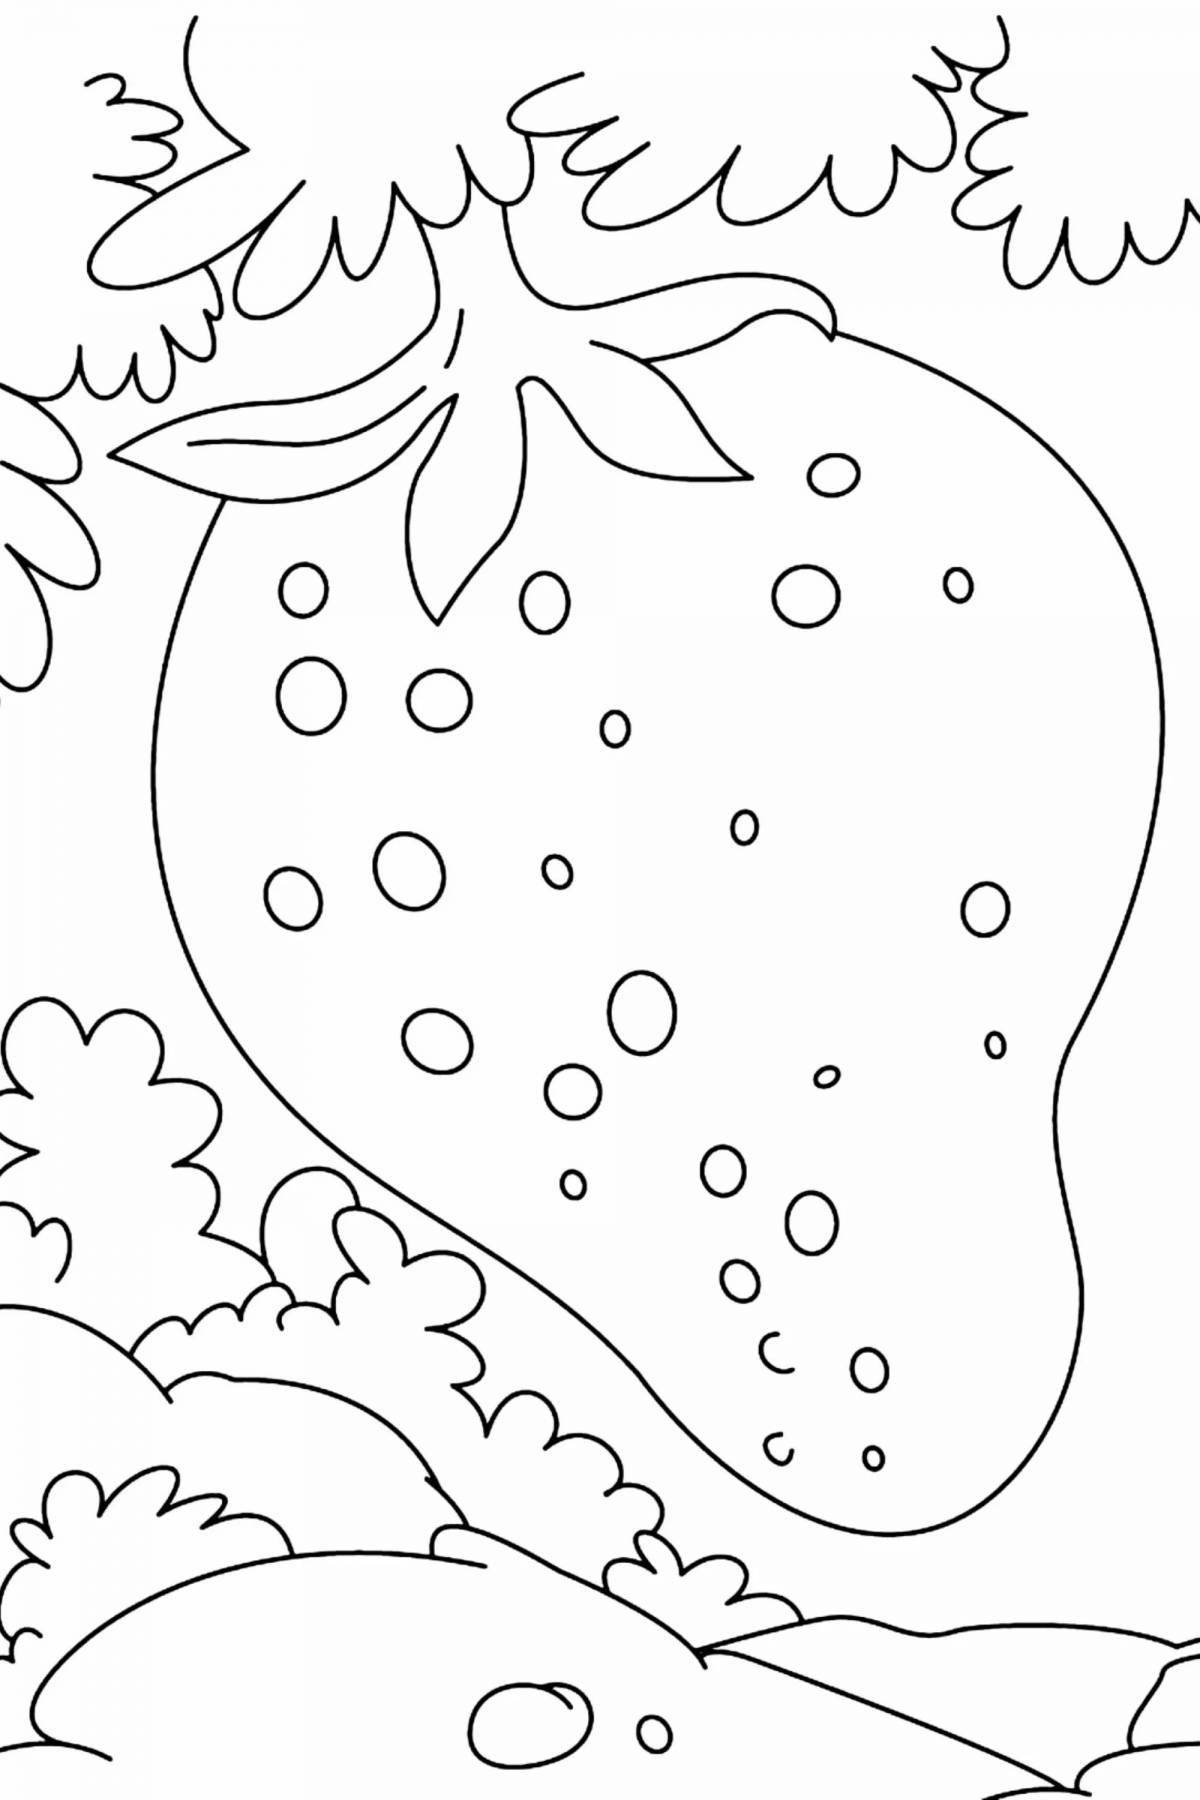 Colorful strawberry coloring game